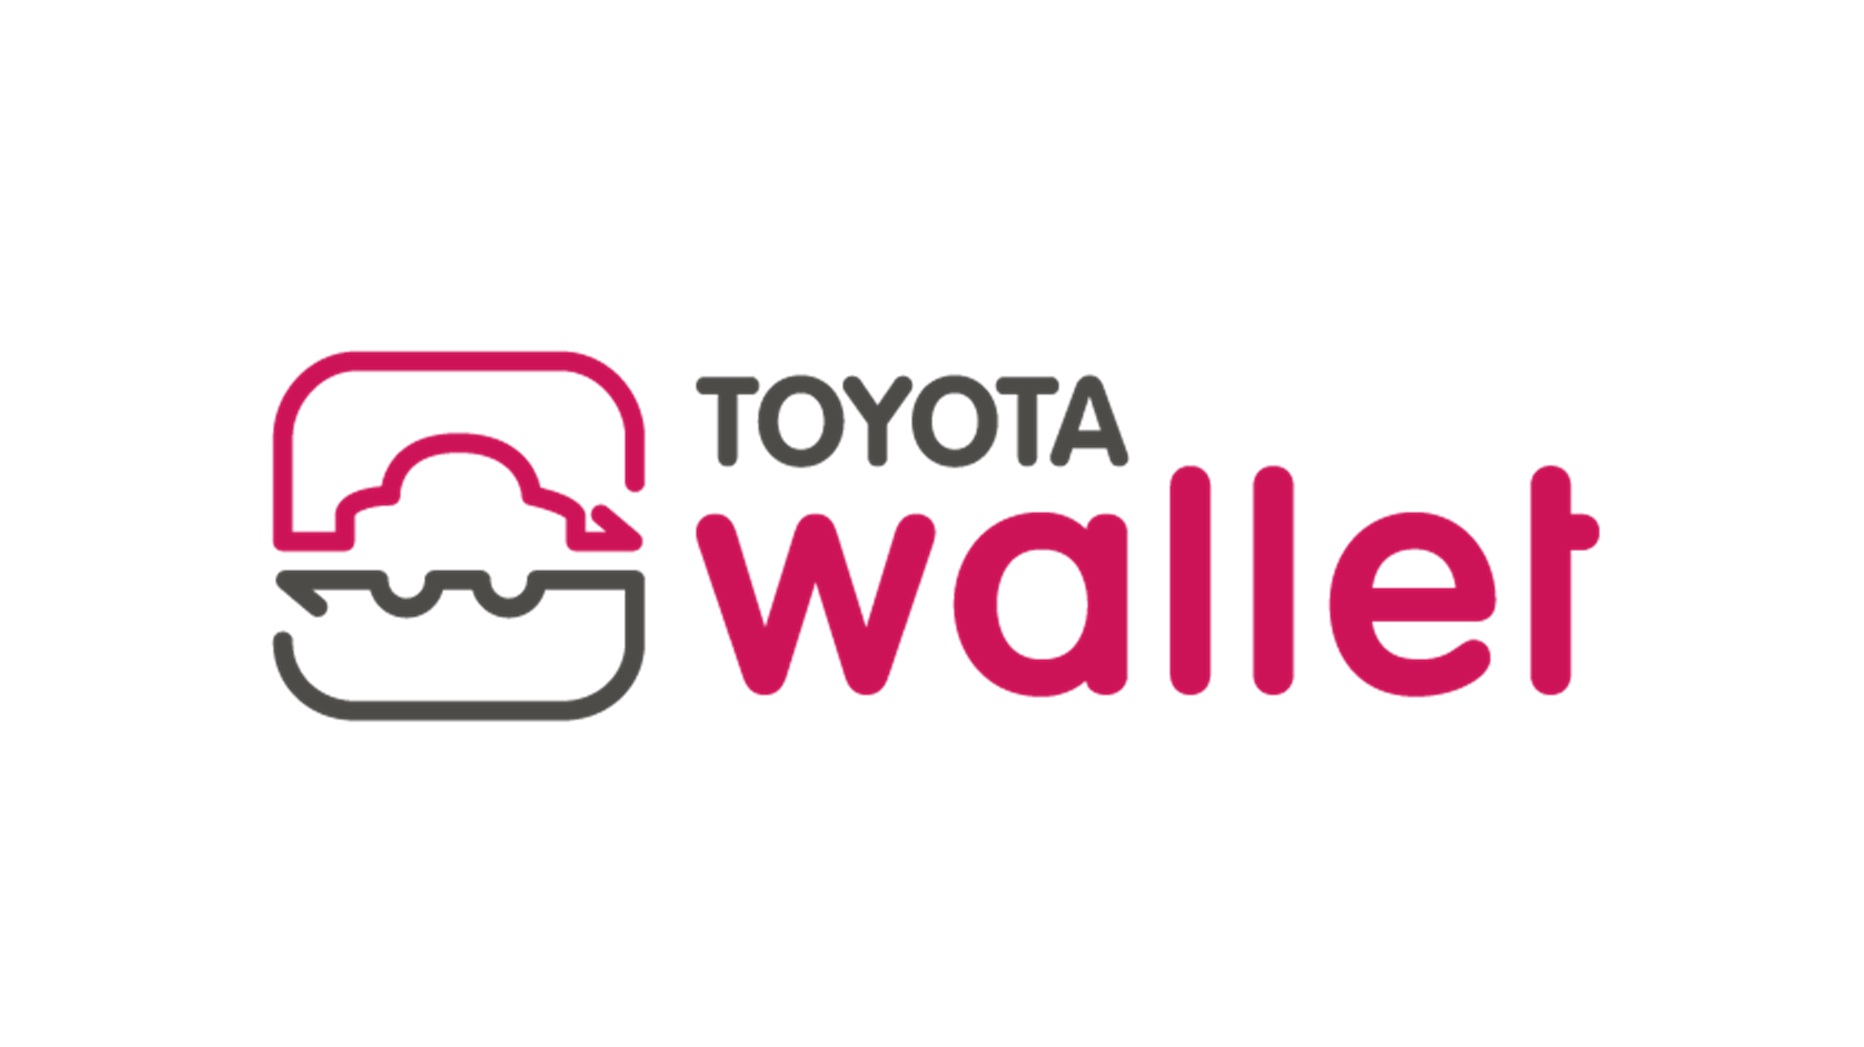 TOYOTA Wallet　抽選会ブース